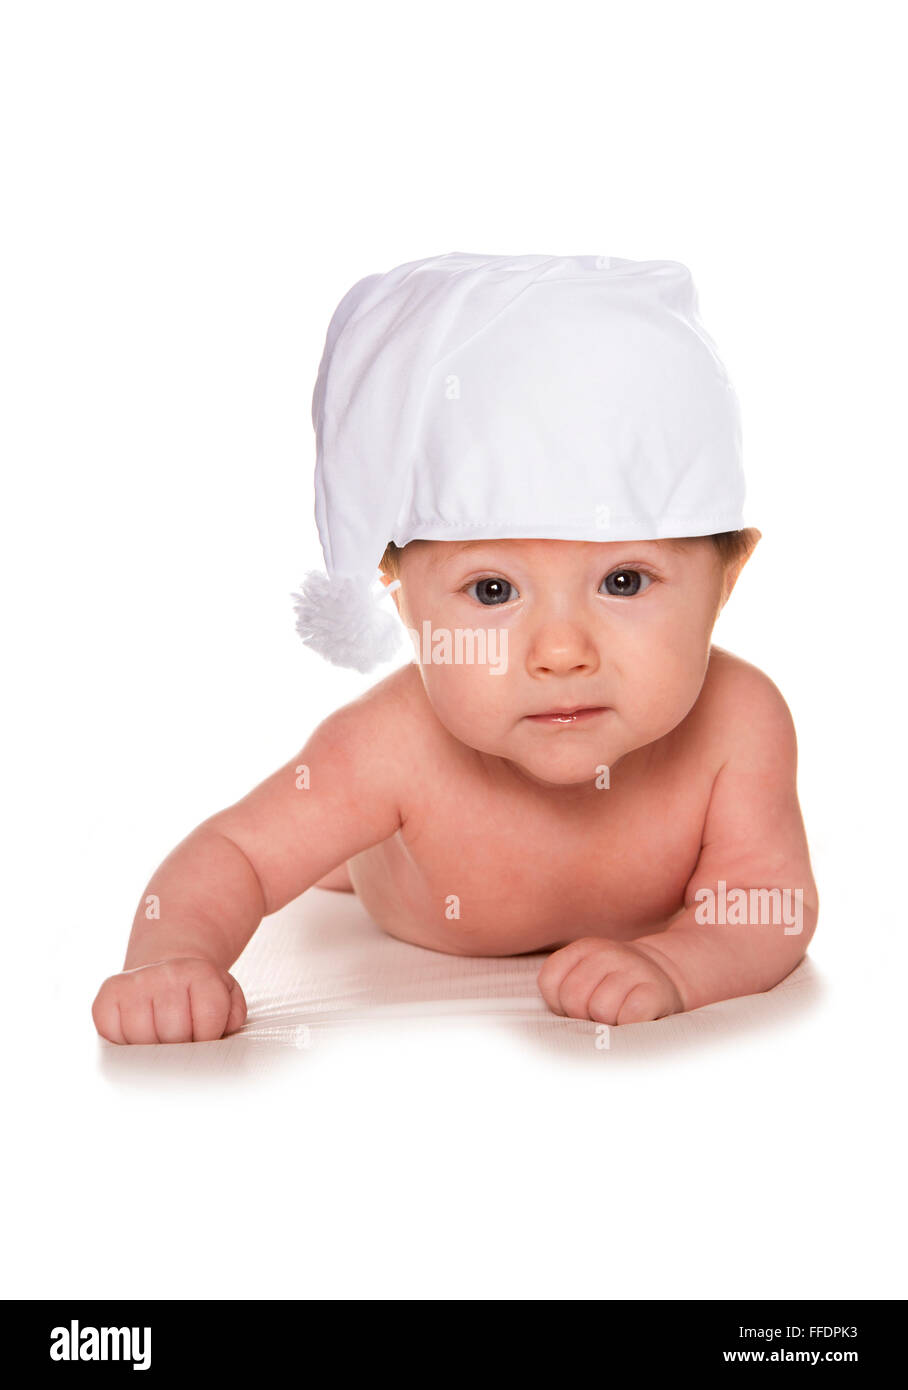 3 Month old baby wearing sleeping hat cutout Stock Photo